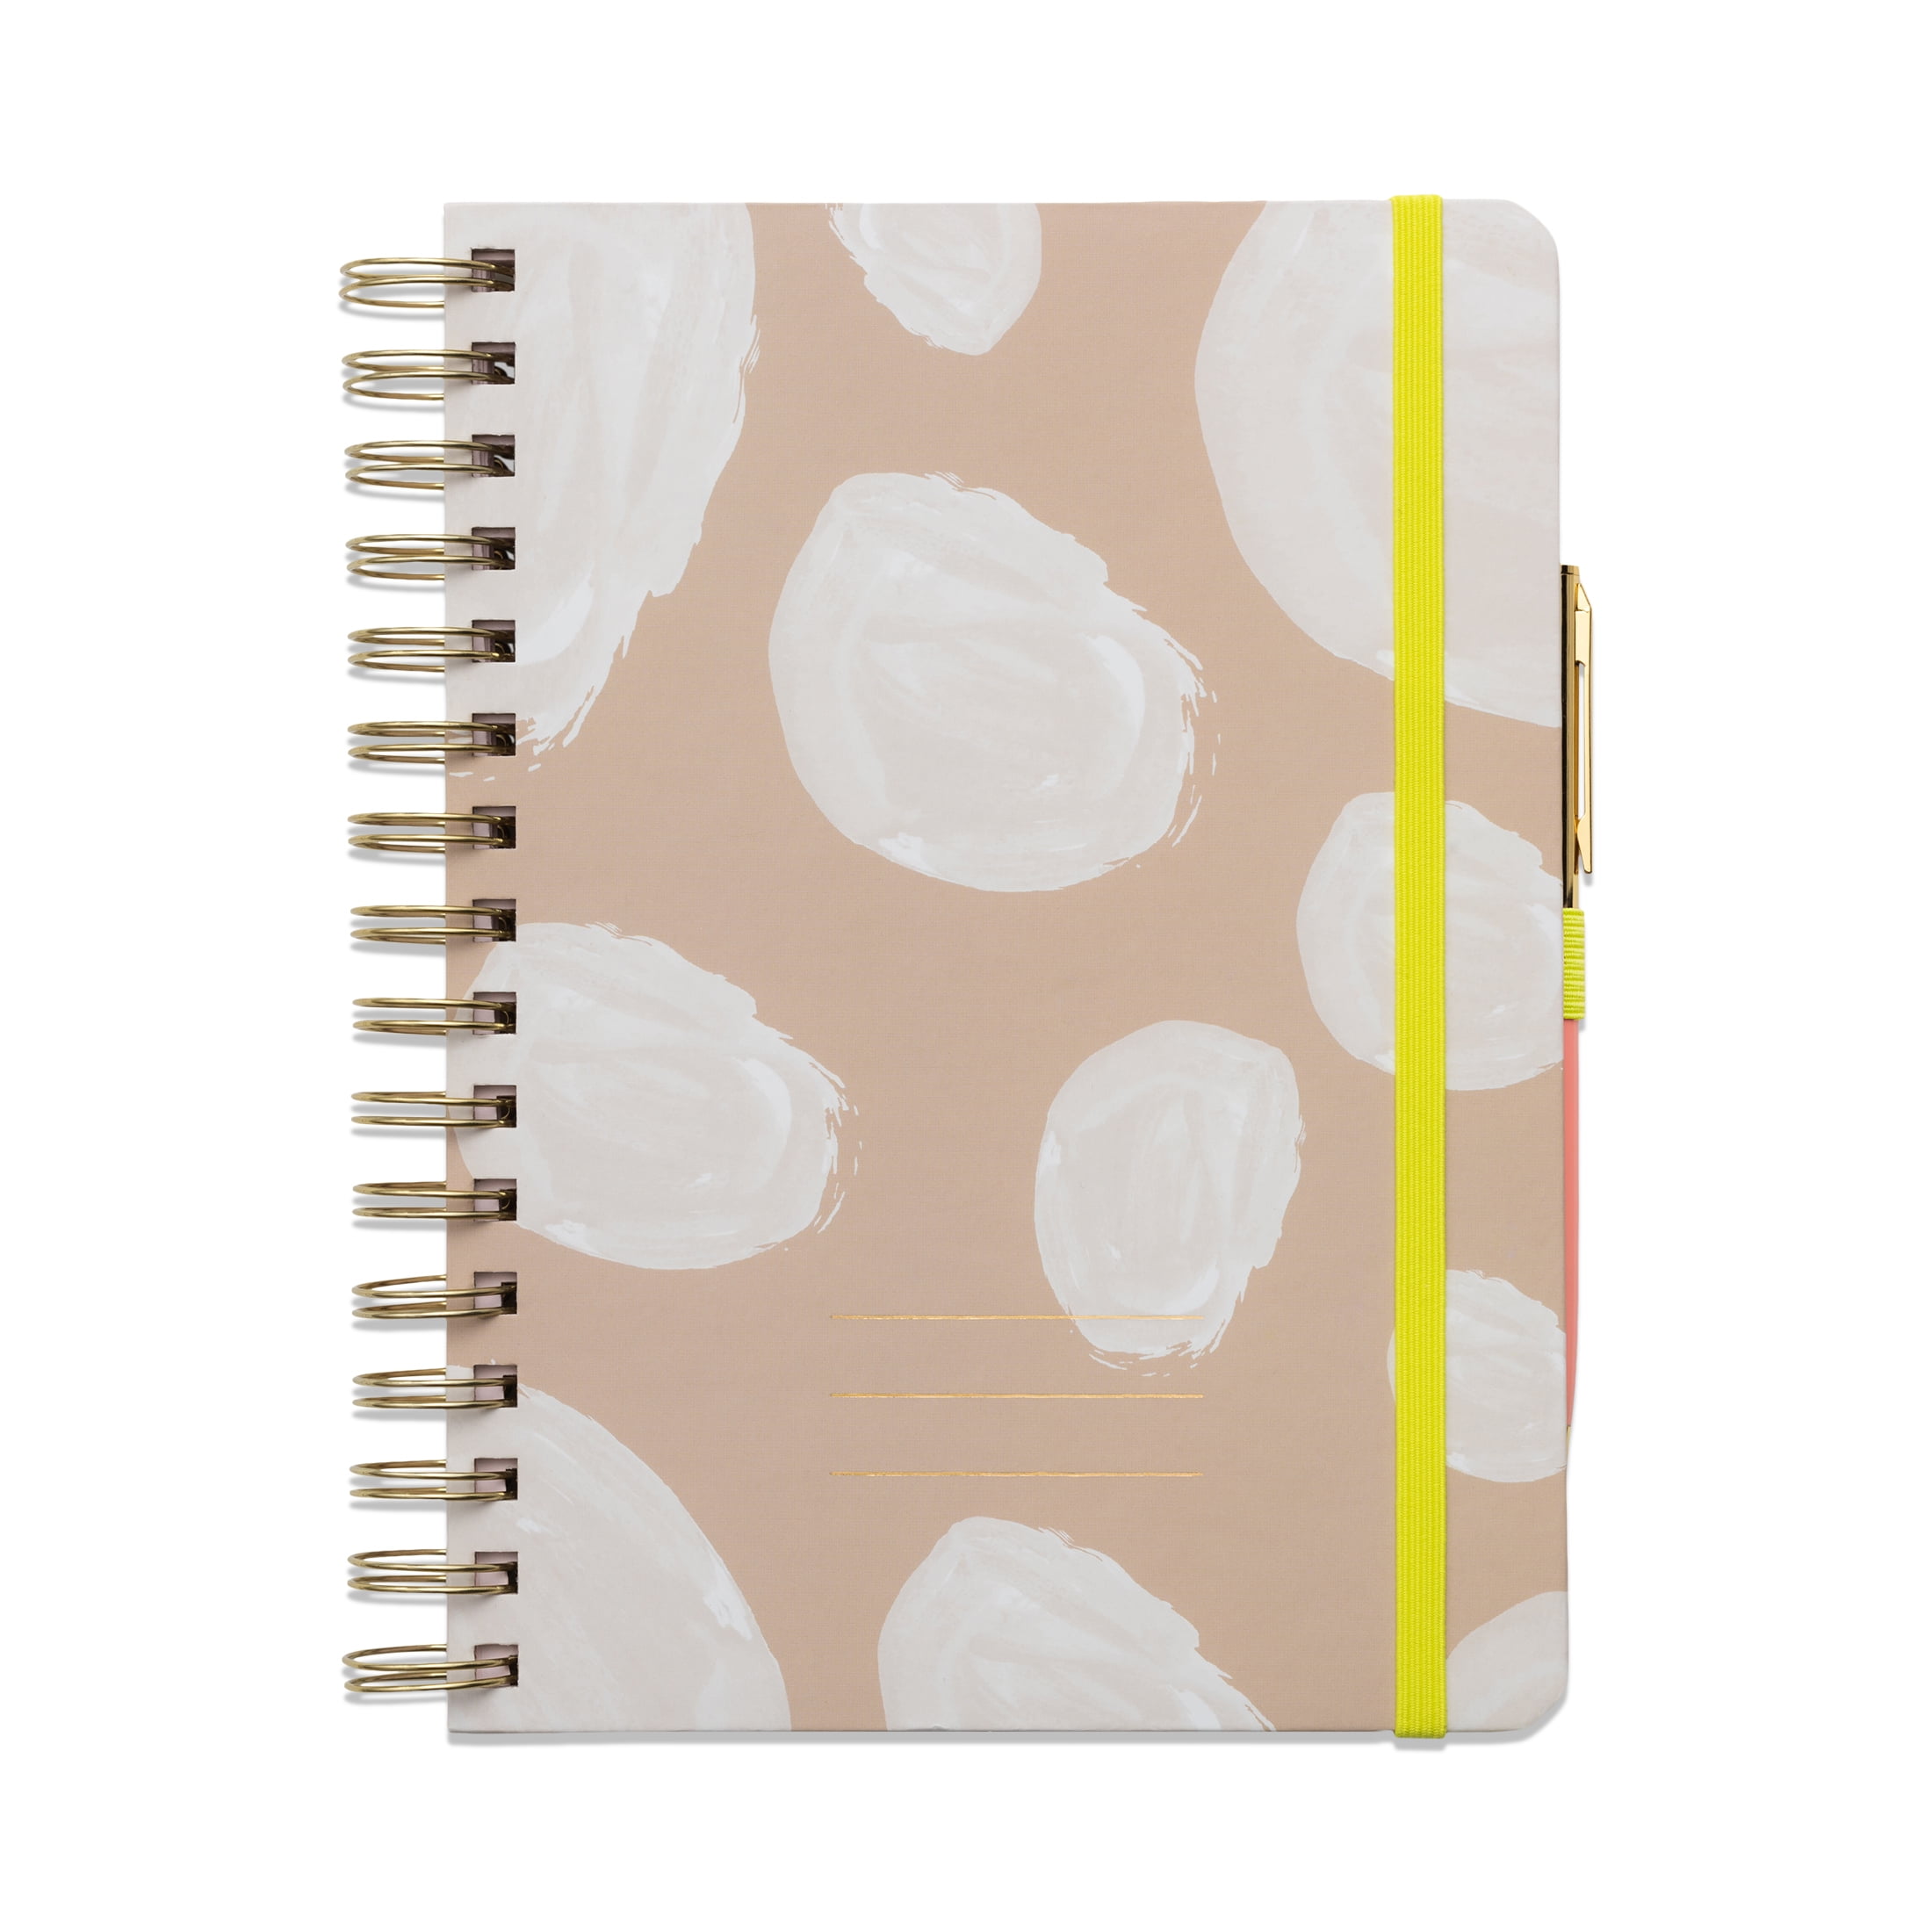 Pen + Gear Twin Wire Bound Journal, Khaki, 6" x 8.25" x 1", 192 Lined Pages, Paper Hard Cover